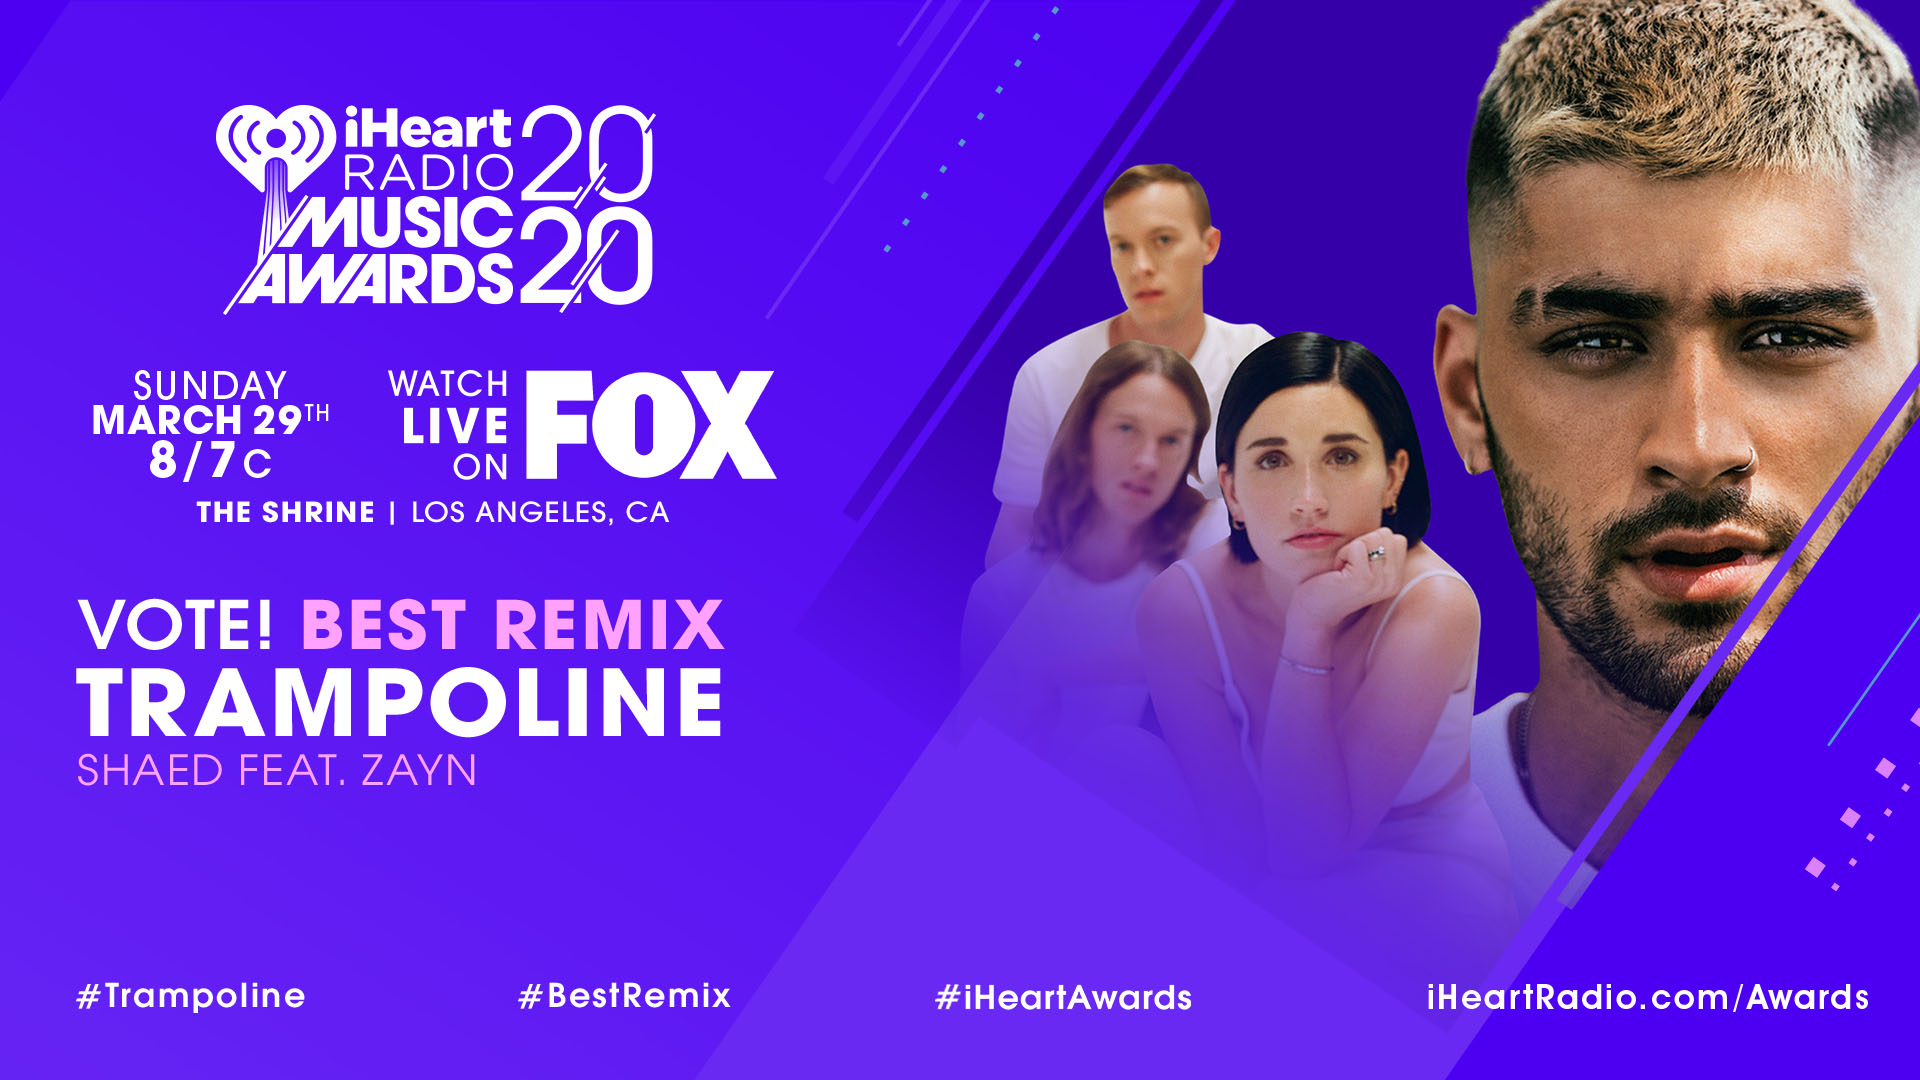 96.7 KISS FM on Twitter: "Shaed and Zayn came together for Trampoline Remix and now it's nomiated for BEST REMIX at the @iheartradio Music Awards! Vote now https://t.co/qseE7V2HzH ! #Trampoline #BestRemix #